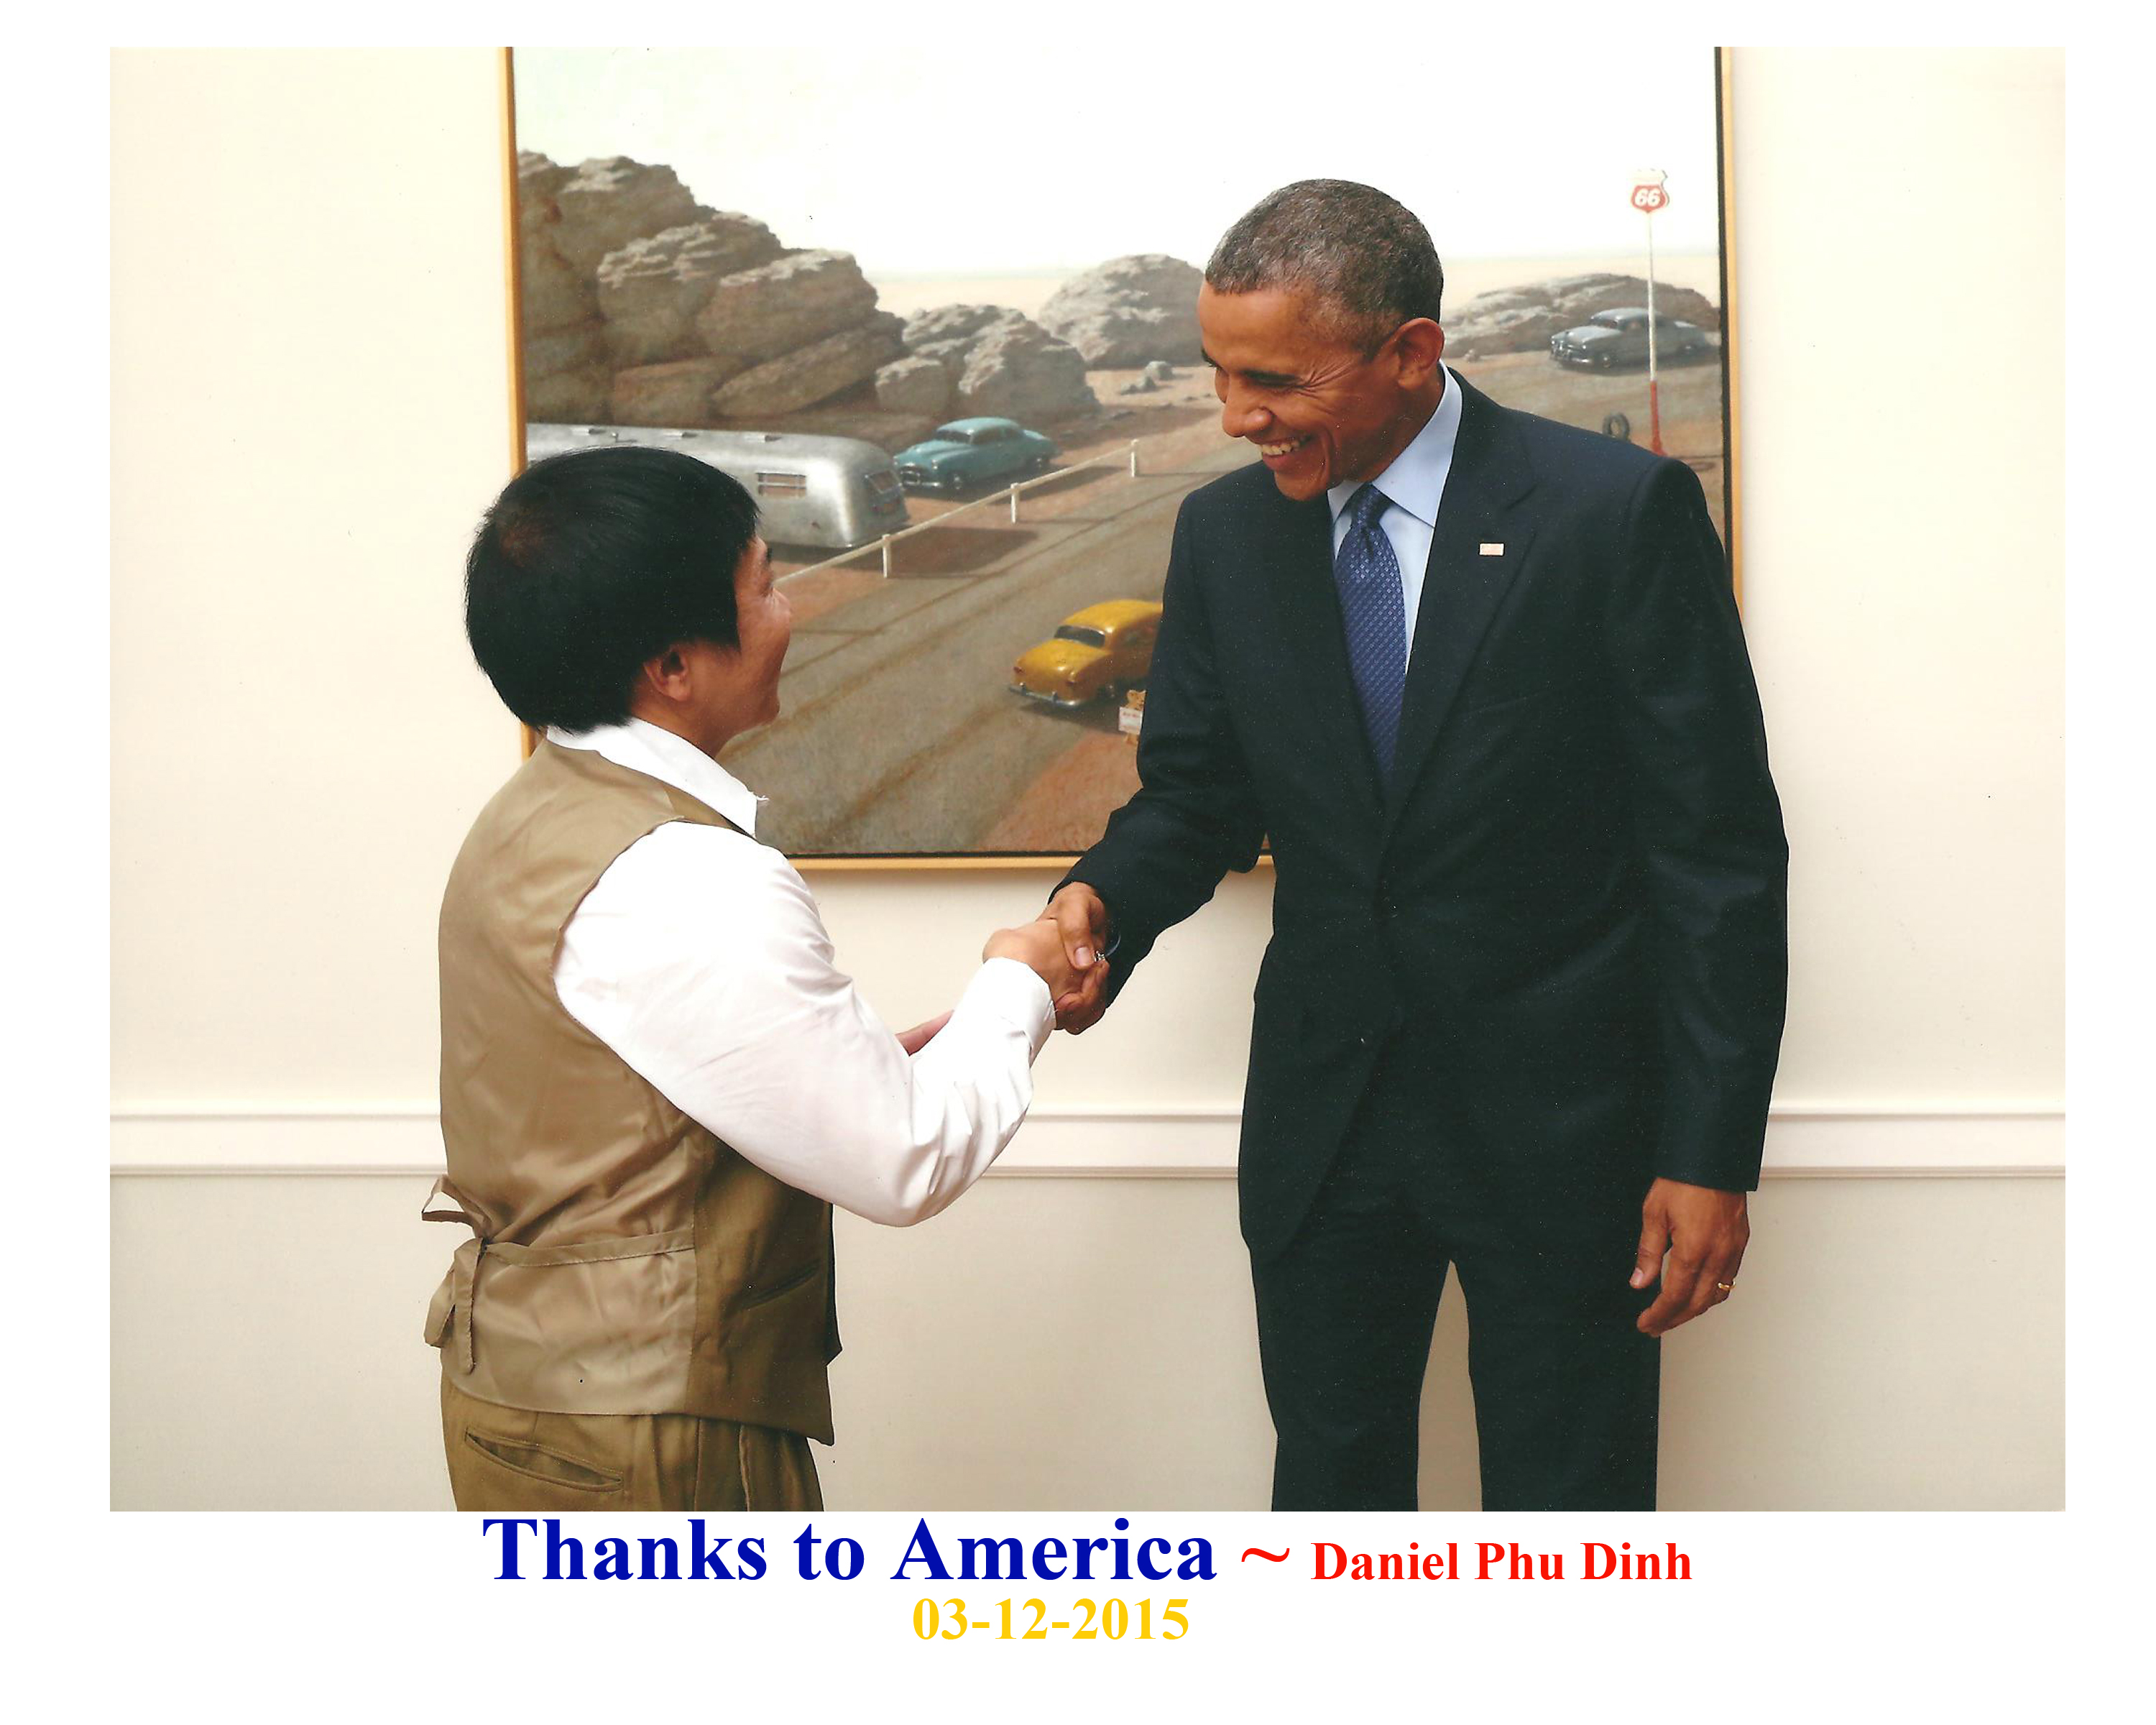 Daniel with President Obama-Thank you and America ~ Daniel Phu Dinh